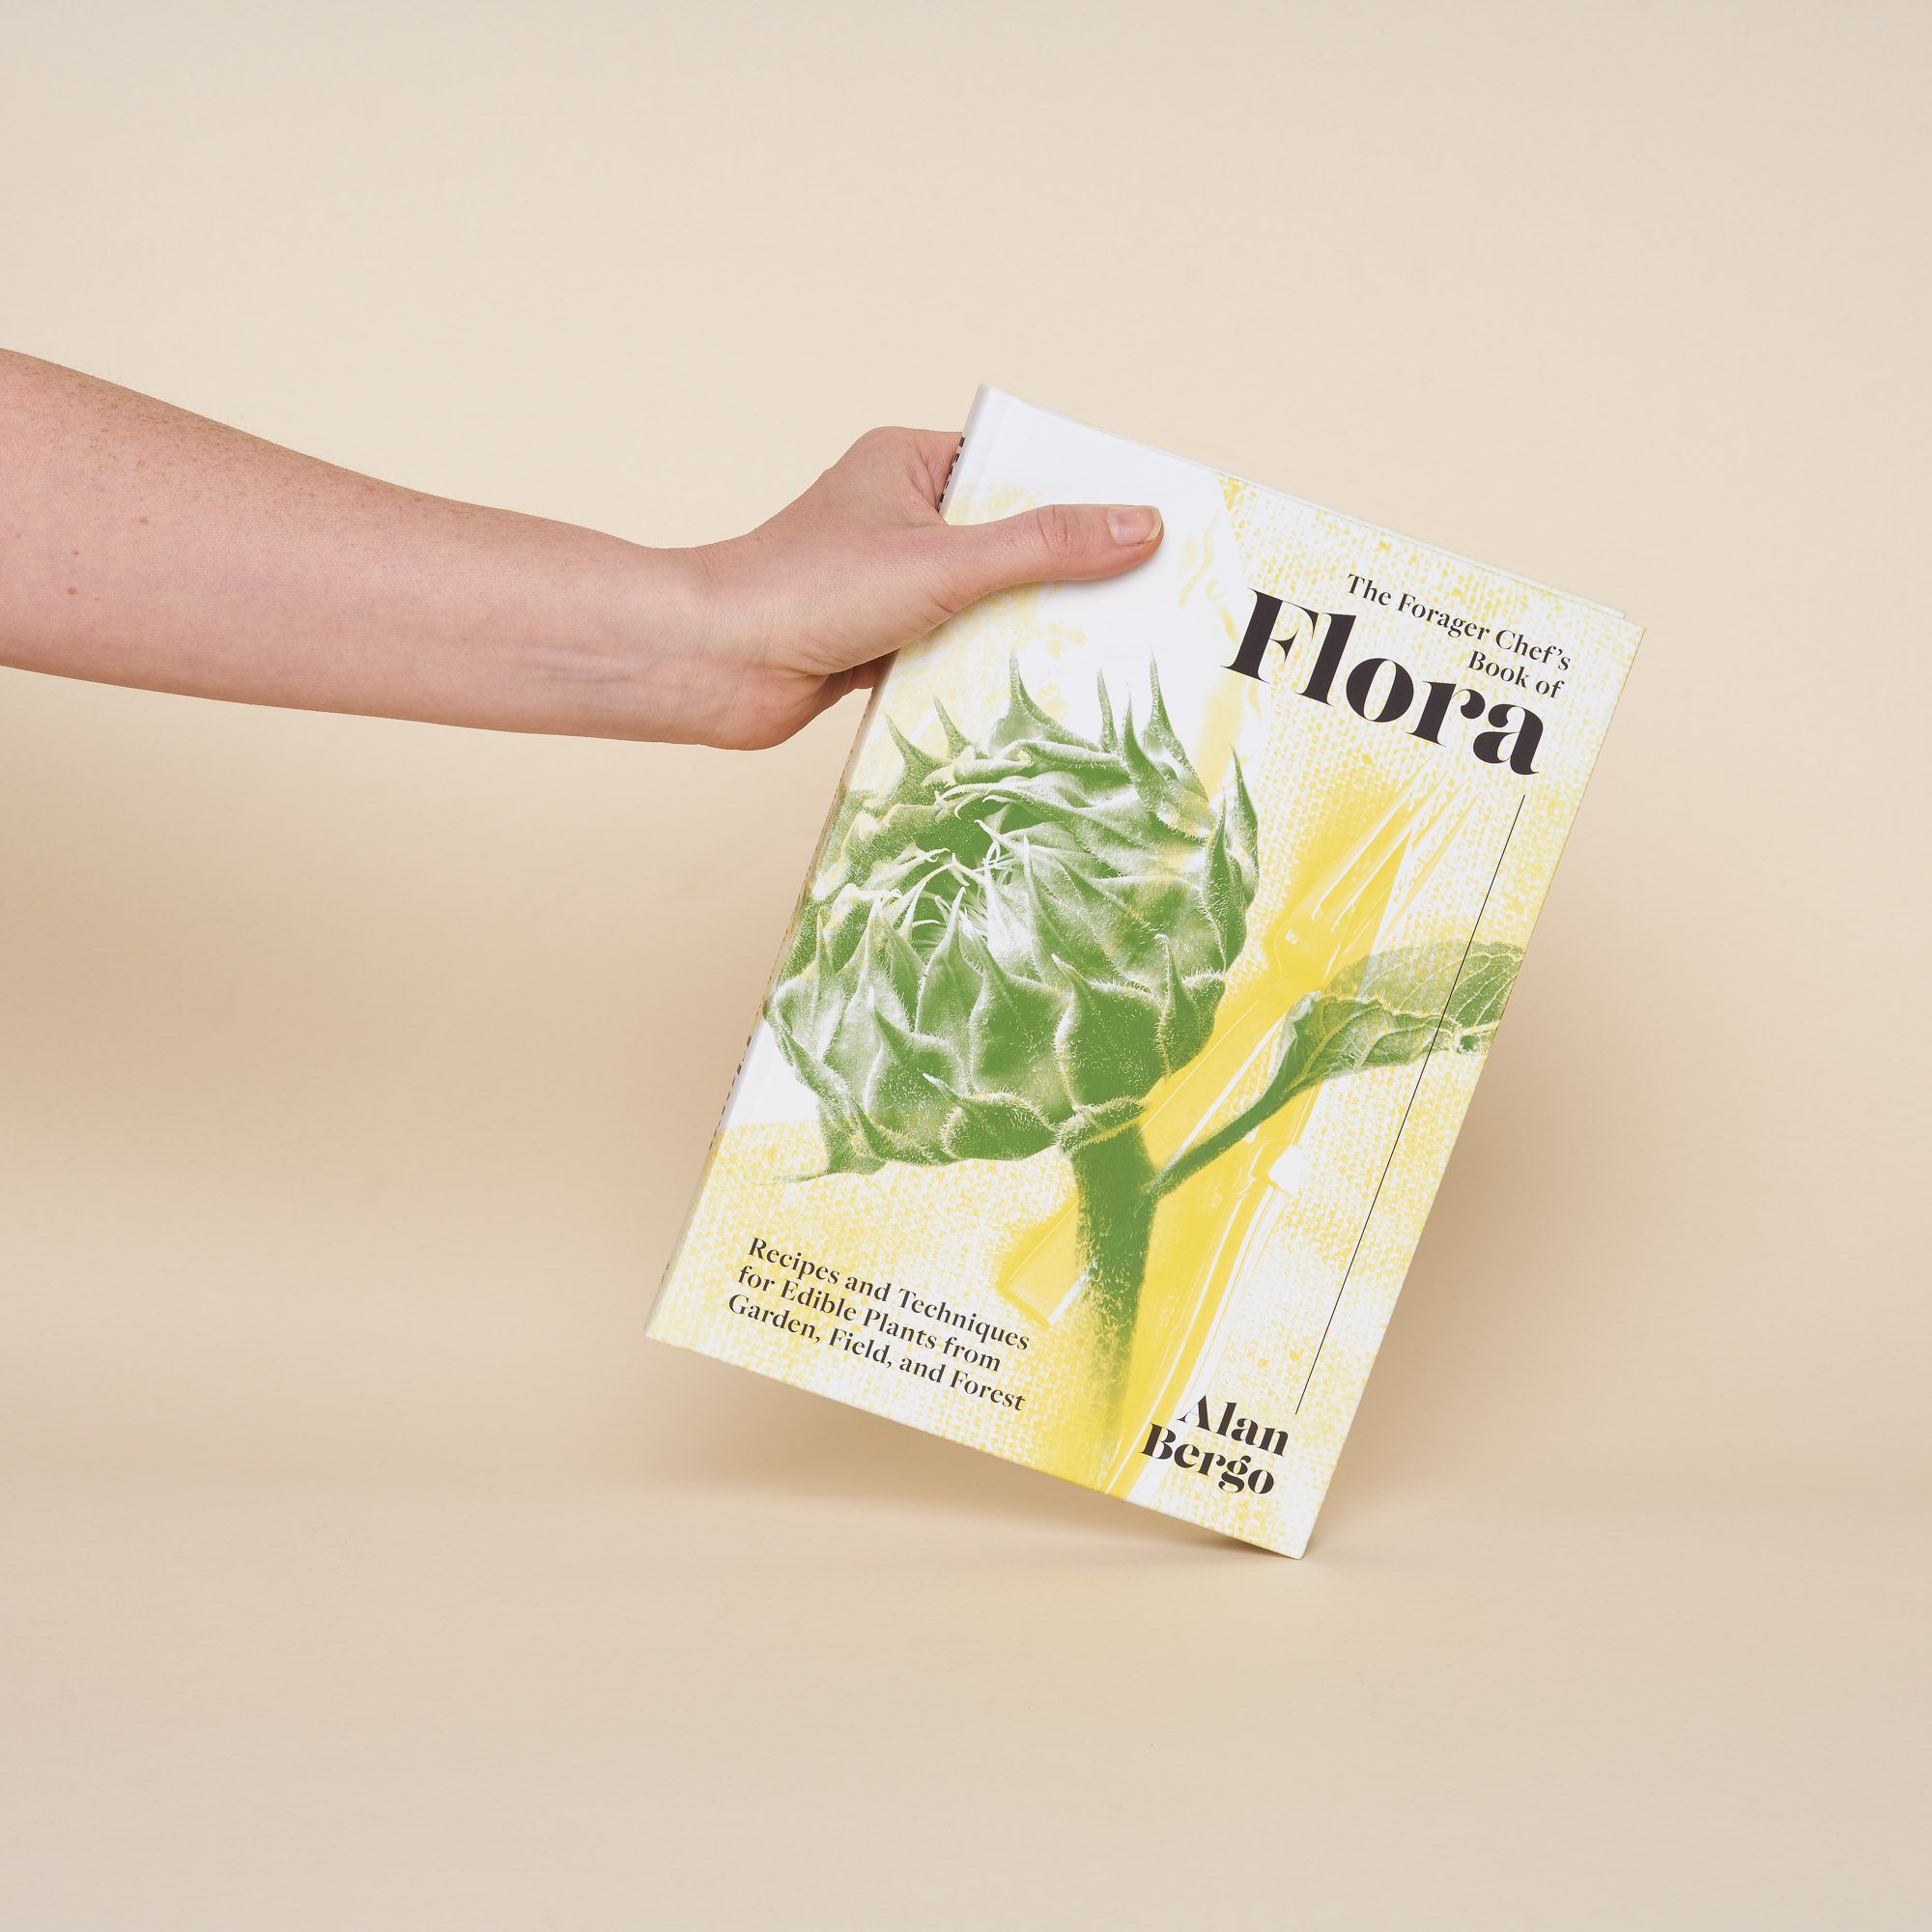 A white book with a green and yellow illustration of a soon-to-bloom sunflower head